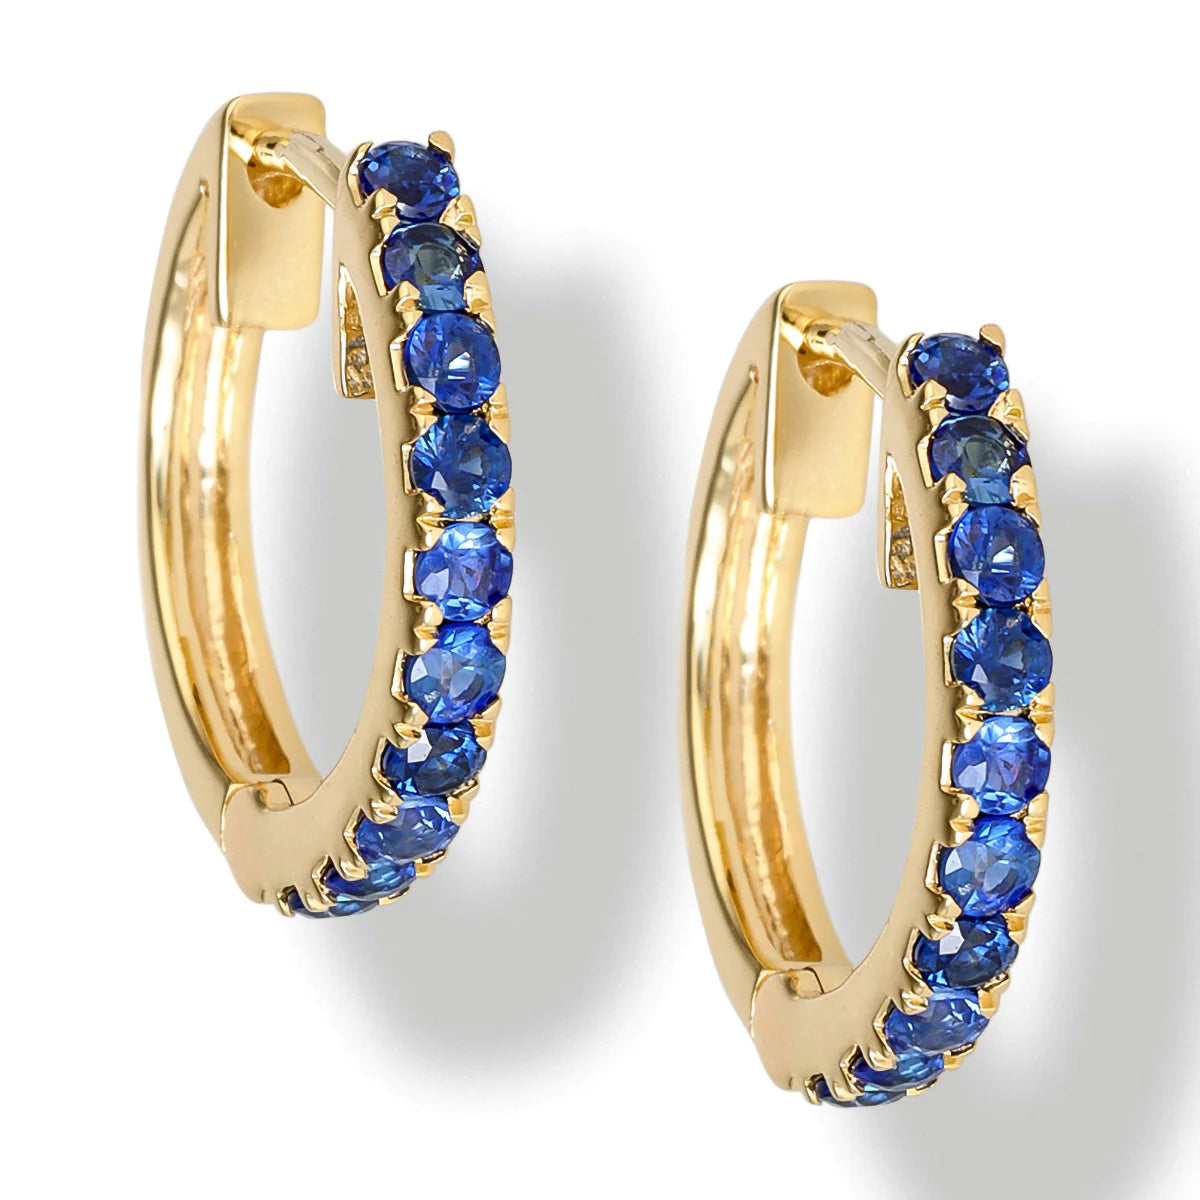 14kt Gold With Blue Sapphire 14.25 Mm Earrings.